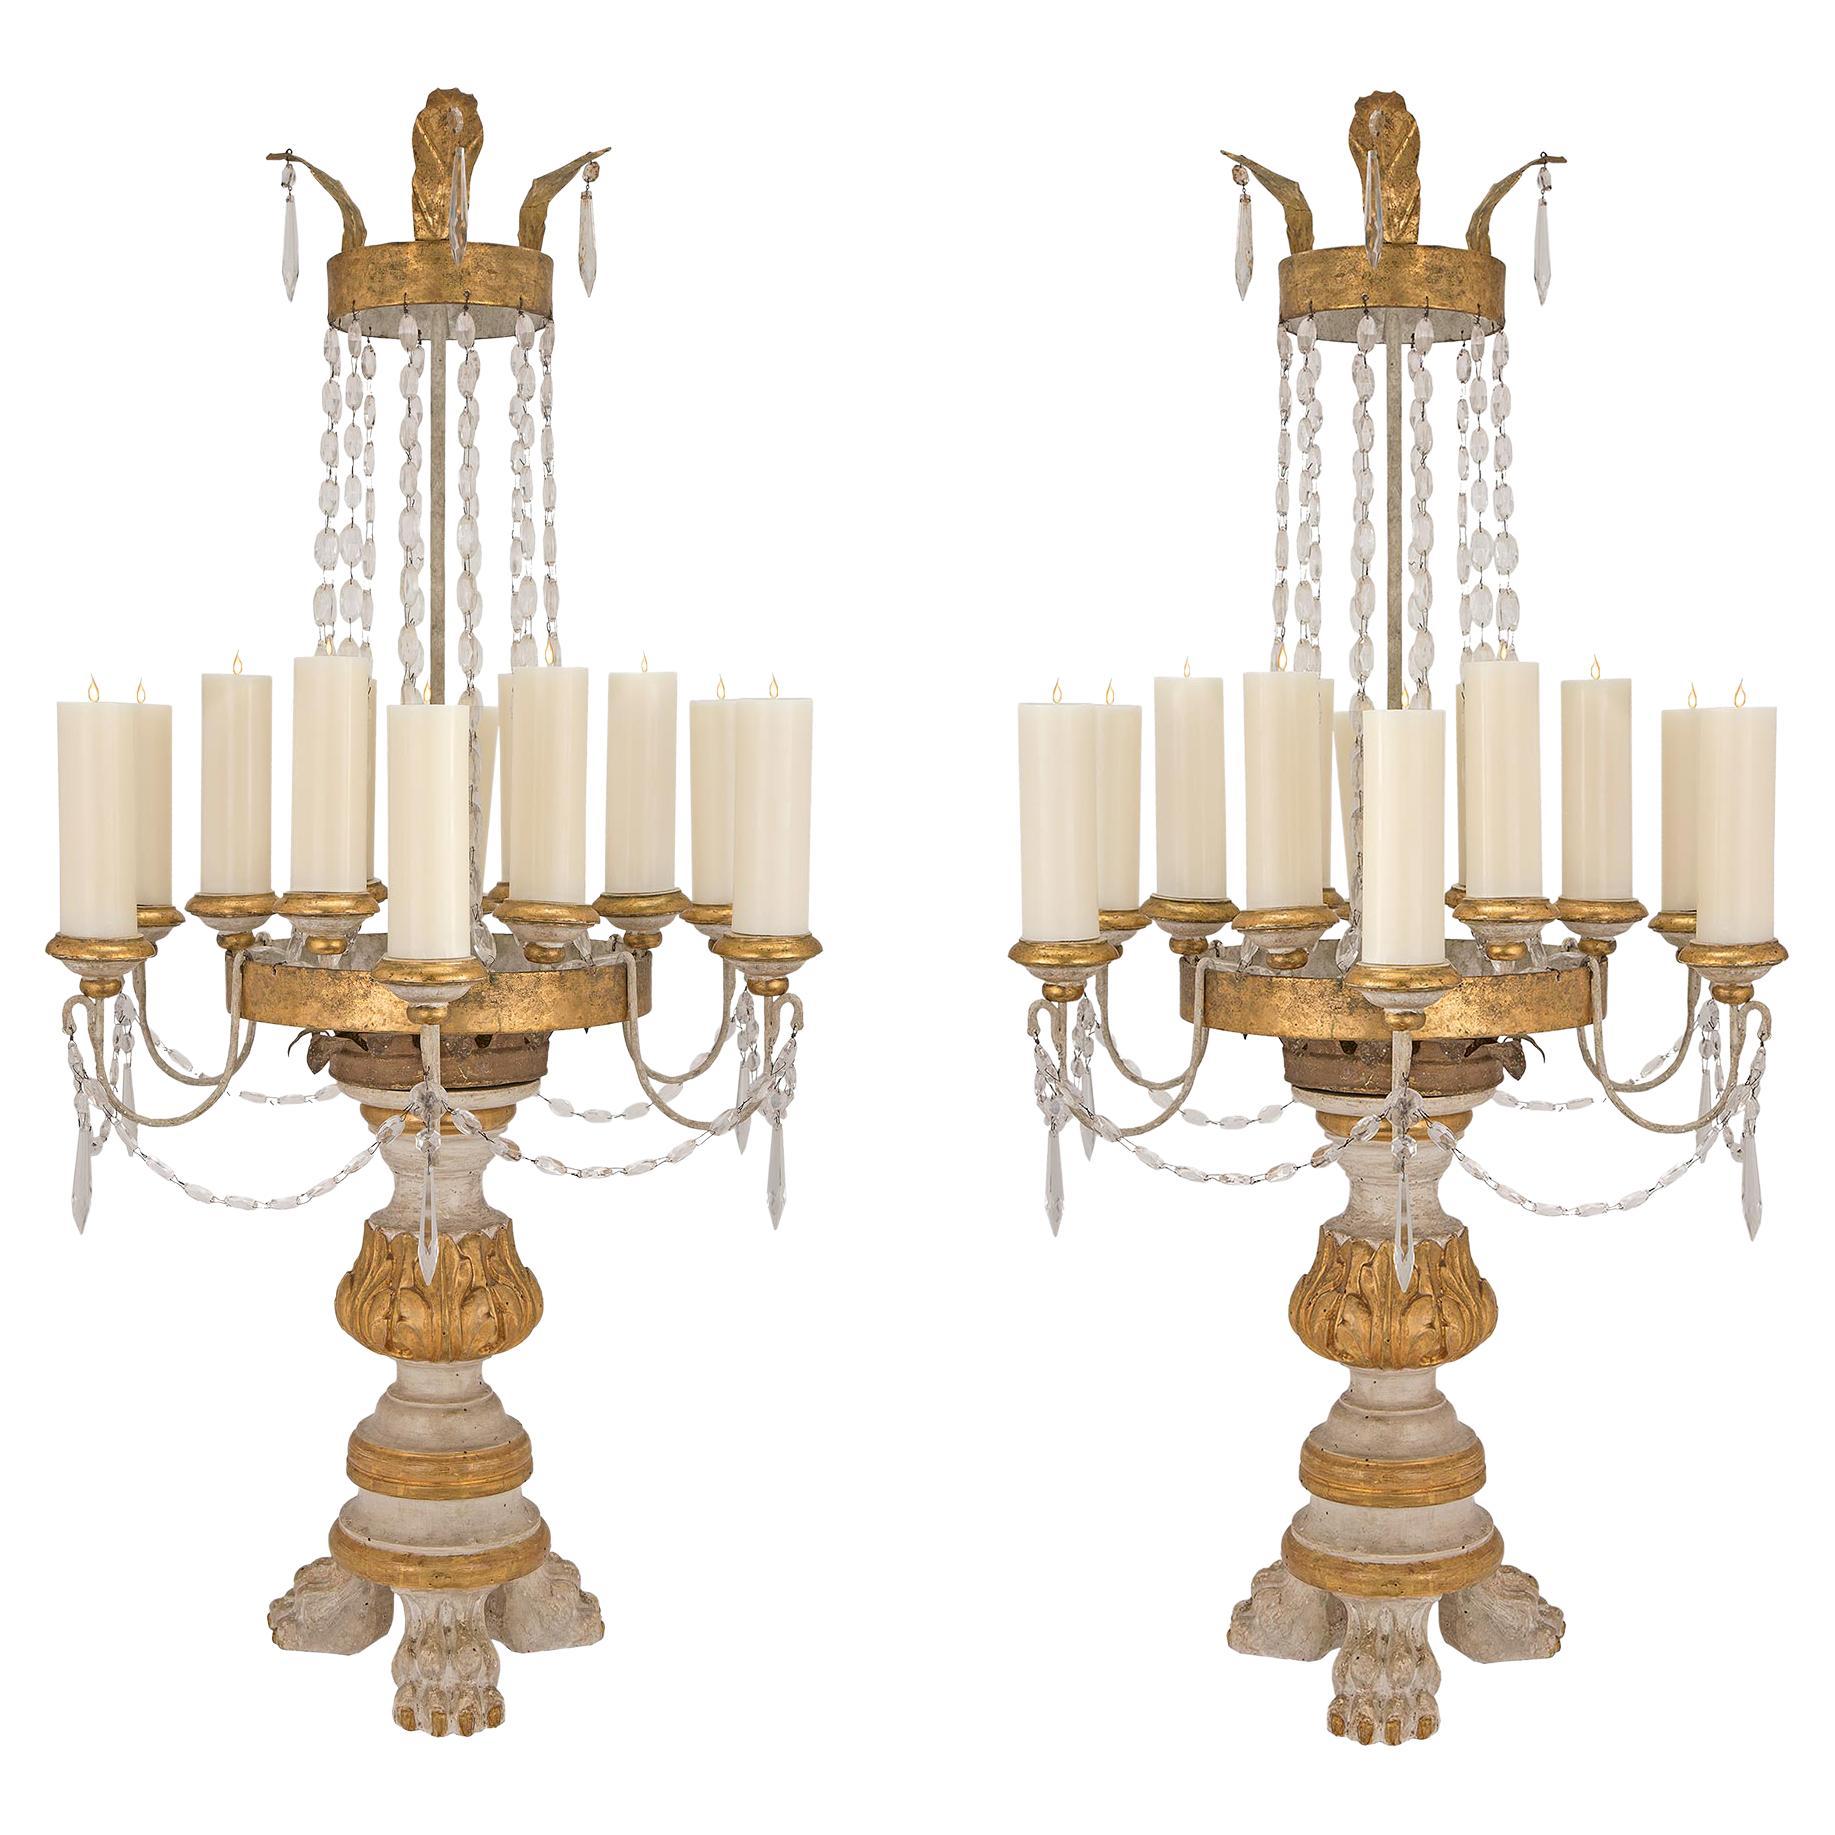 Pair of Italian 18th Century Giltwood and Gilt Metal Tuscan Candelabras For Sale